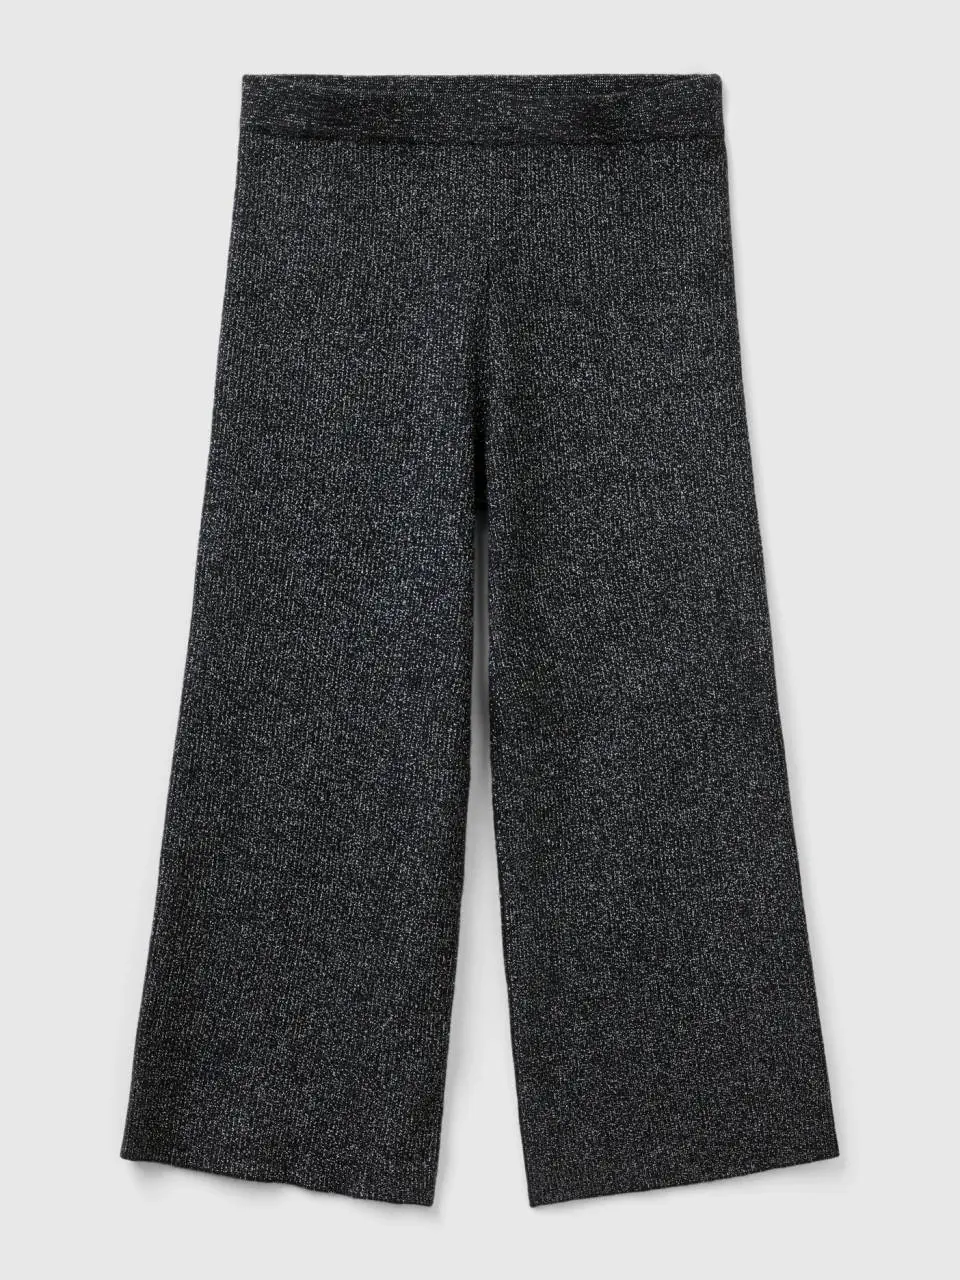 Benetton knit pants with lurex. 1